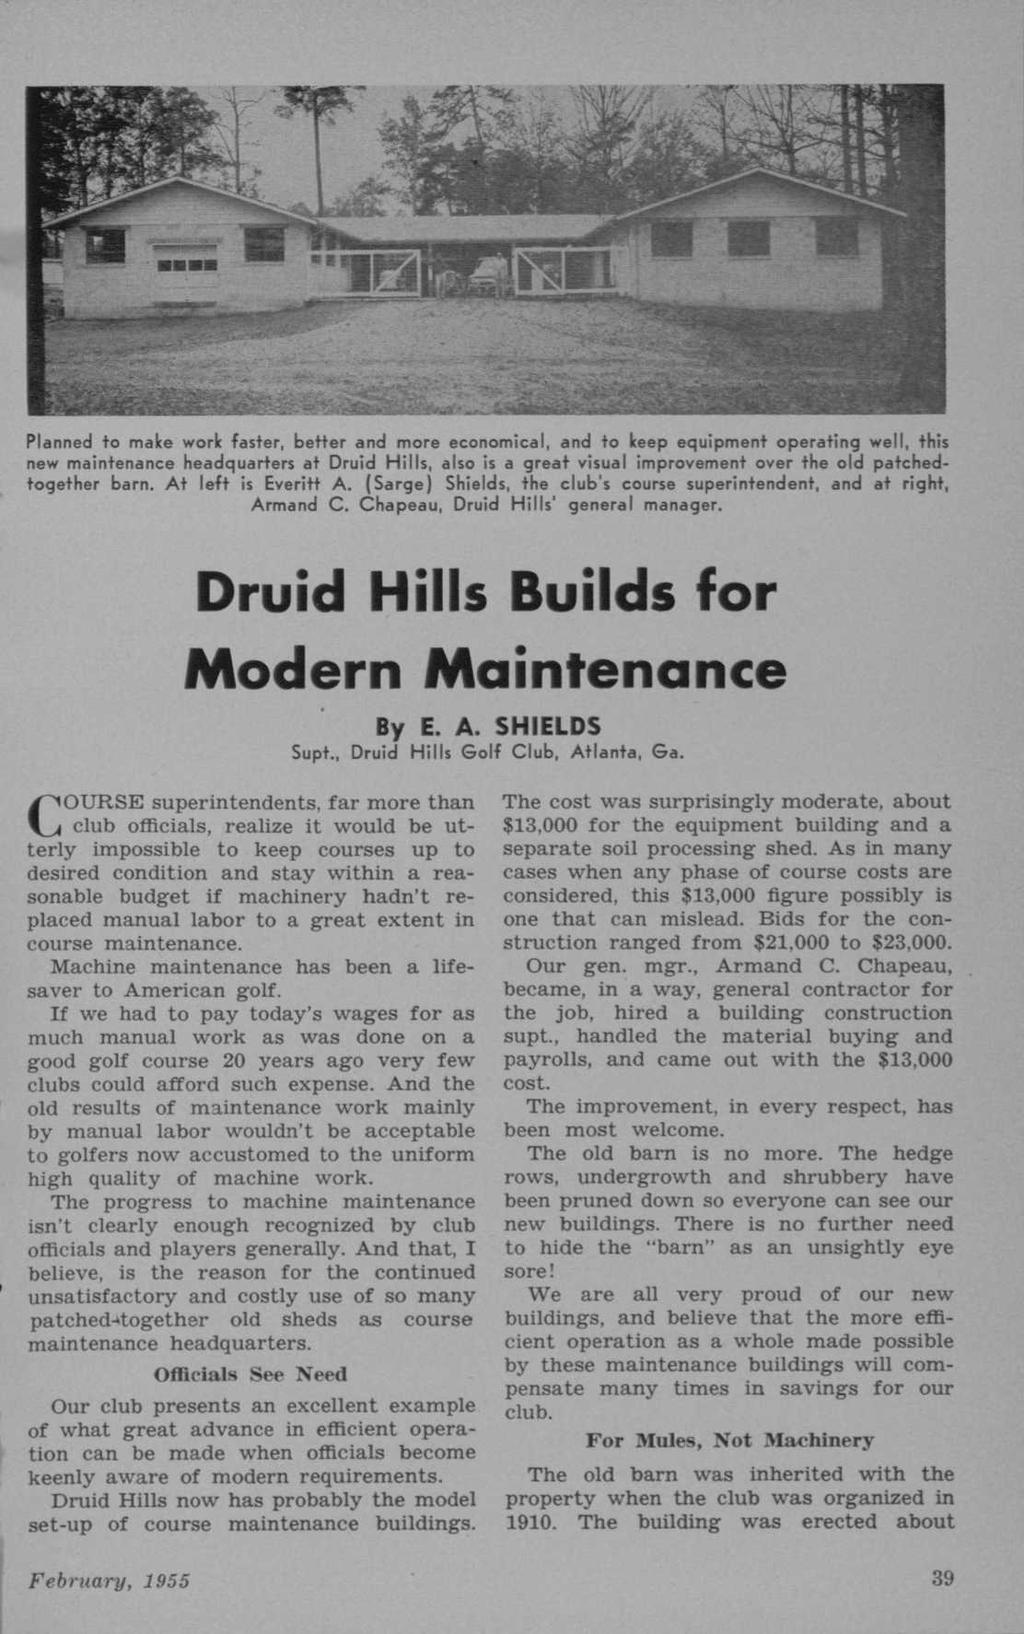 Planned to make work faster, better and more economical, and to keep equipment operating well, this new maintenance headquarters at Druid Hills, also is a great visual improvement over the old